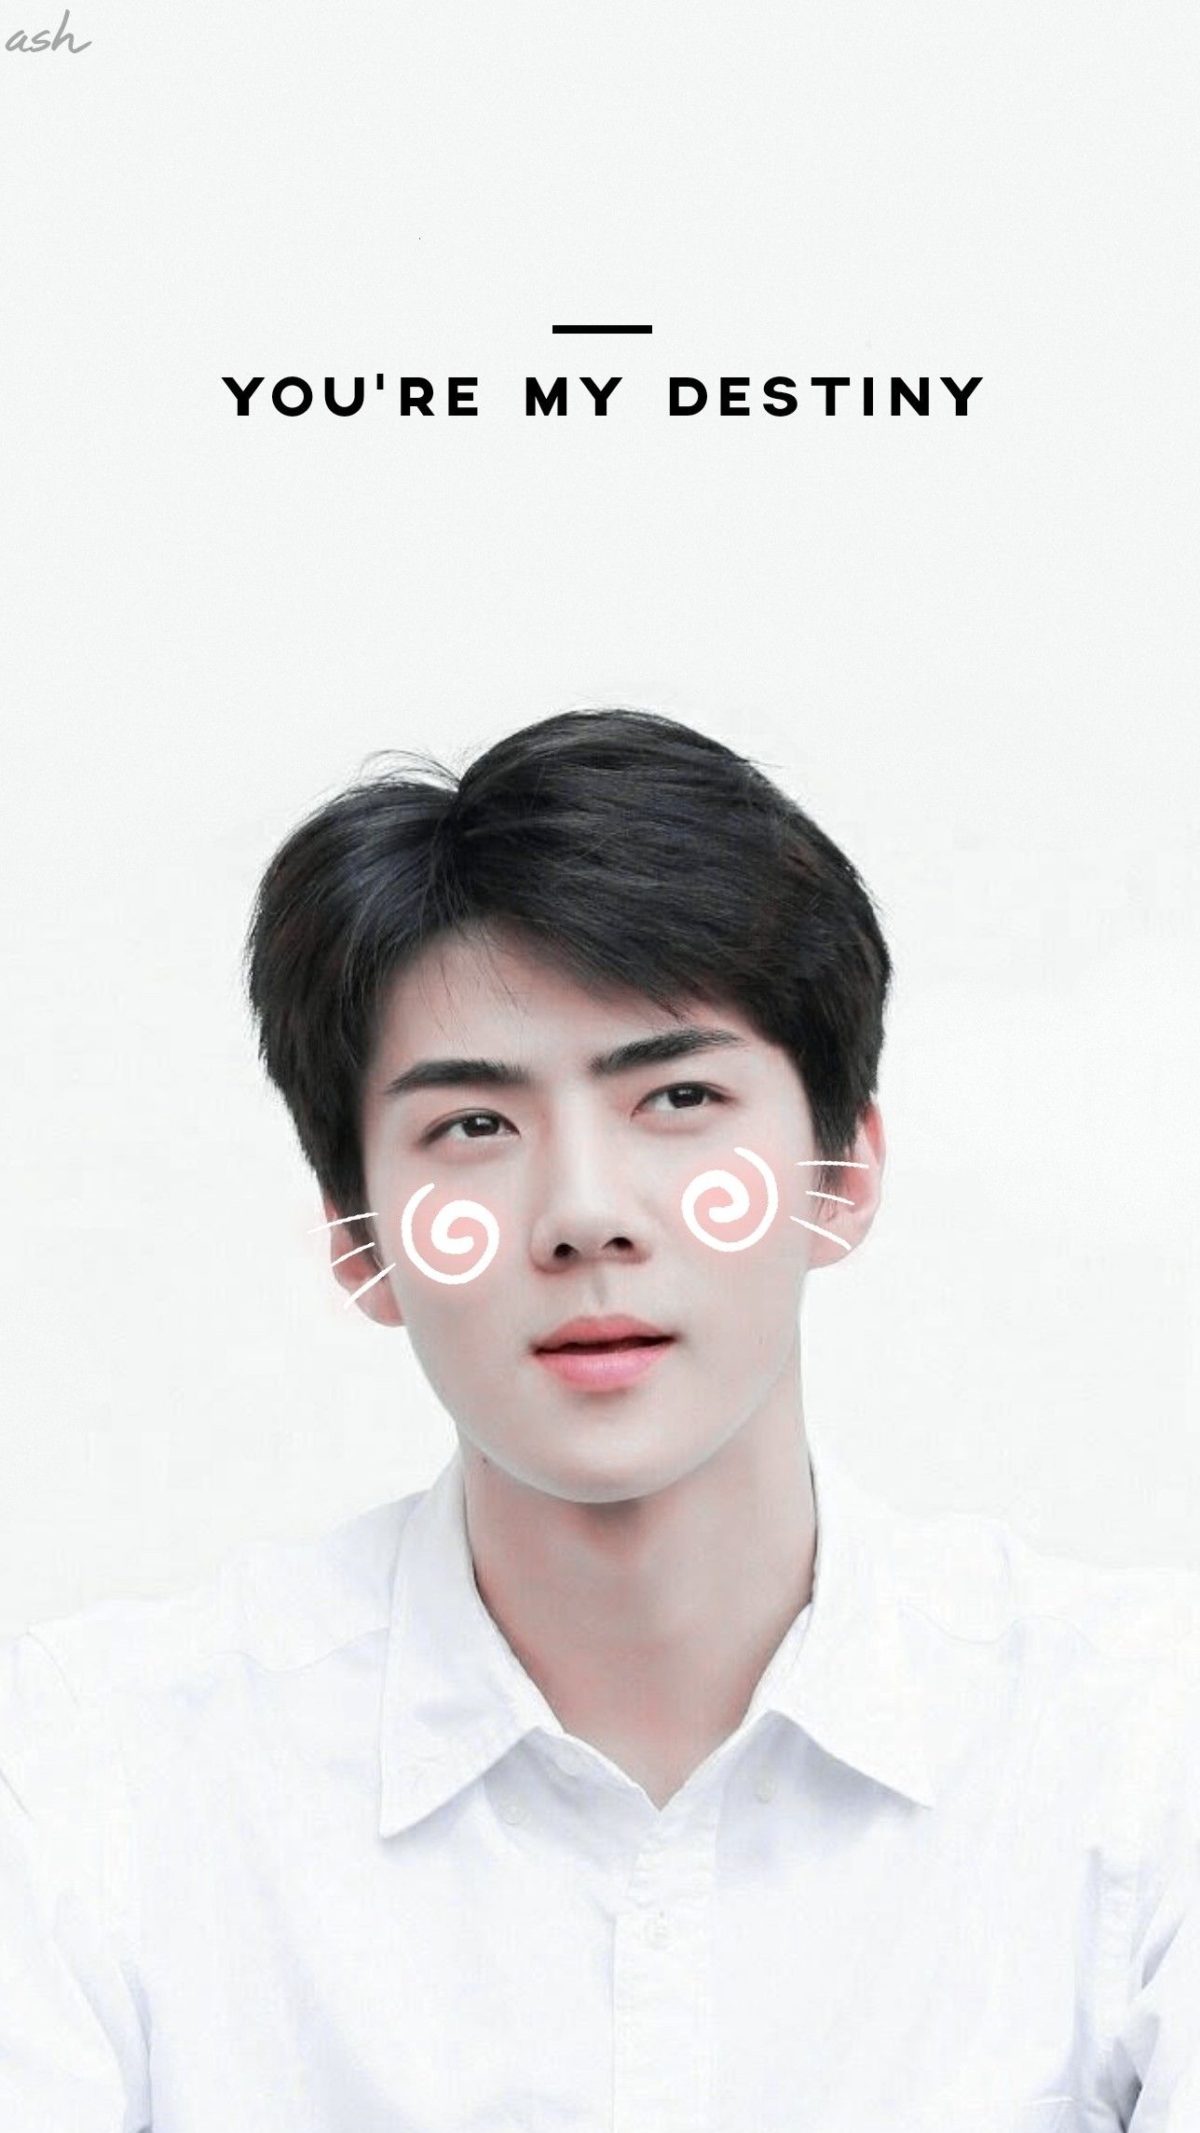 Pin by Oh Sehun on EXO wallpapers | Pinterest | Exo, Sehun and K pop